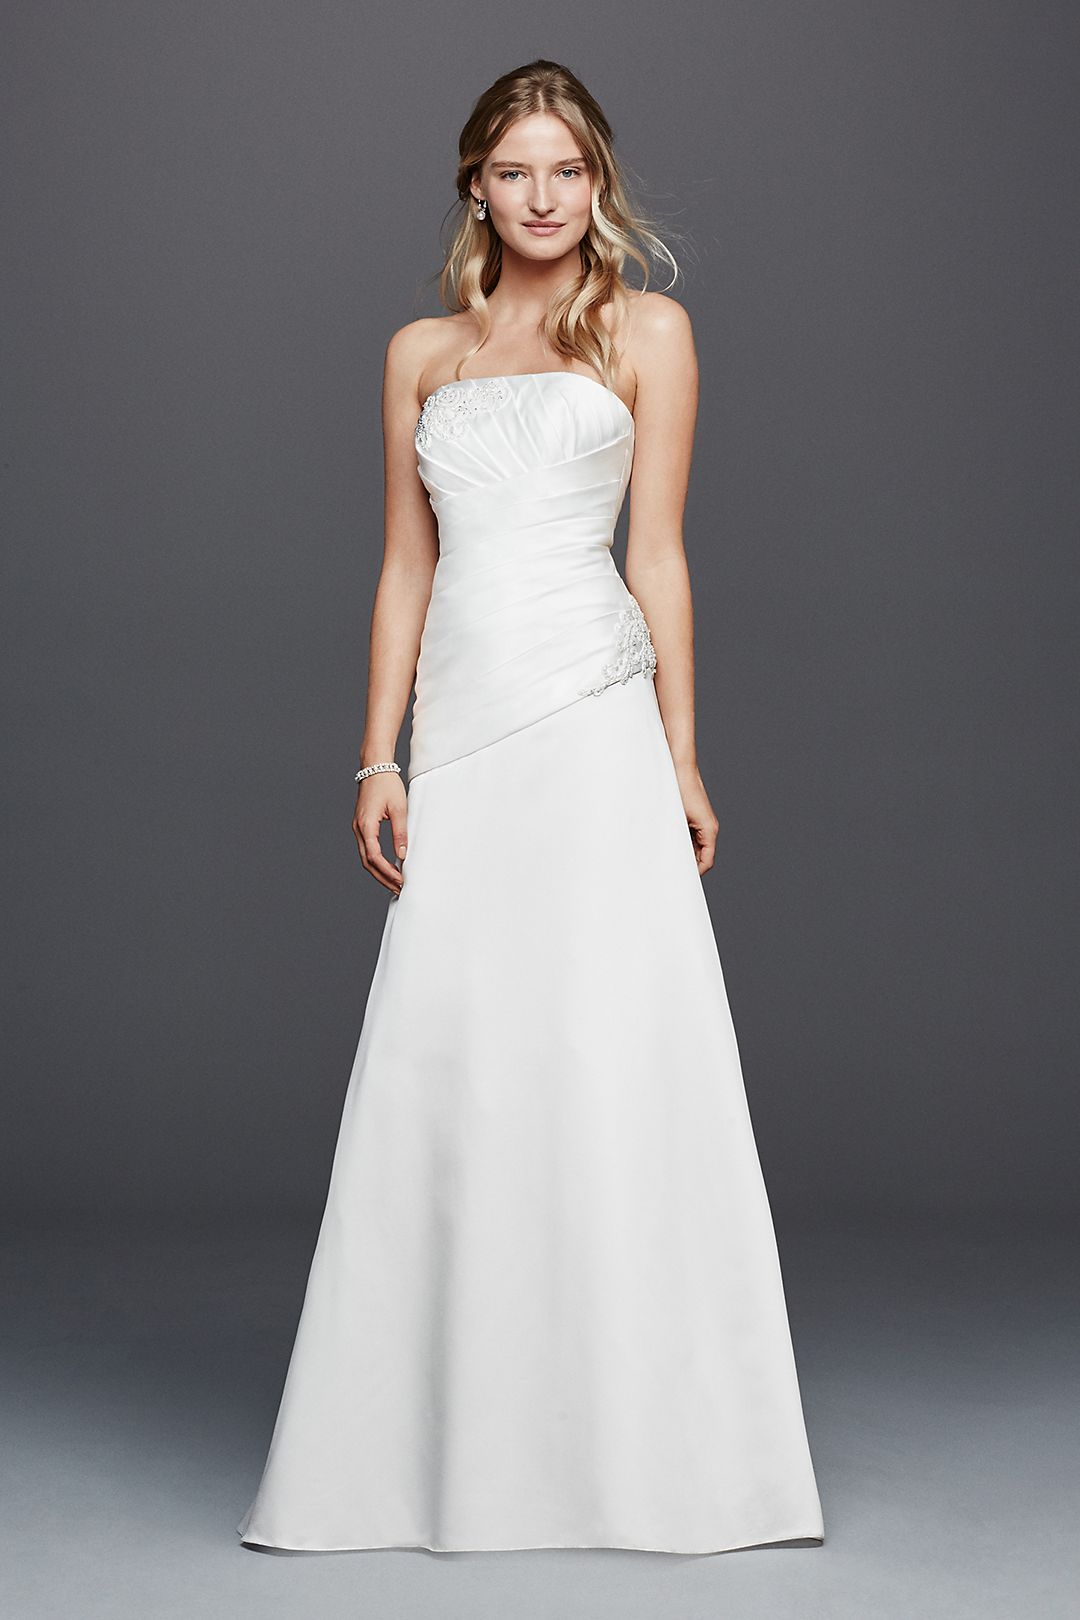 As Is Strapless Ruched Wedding Dress with Lace Image 4